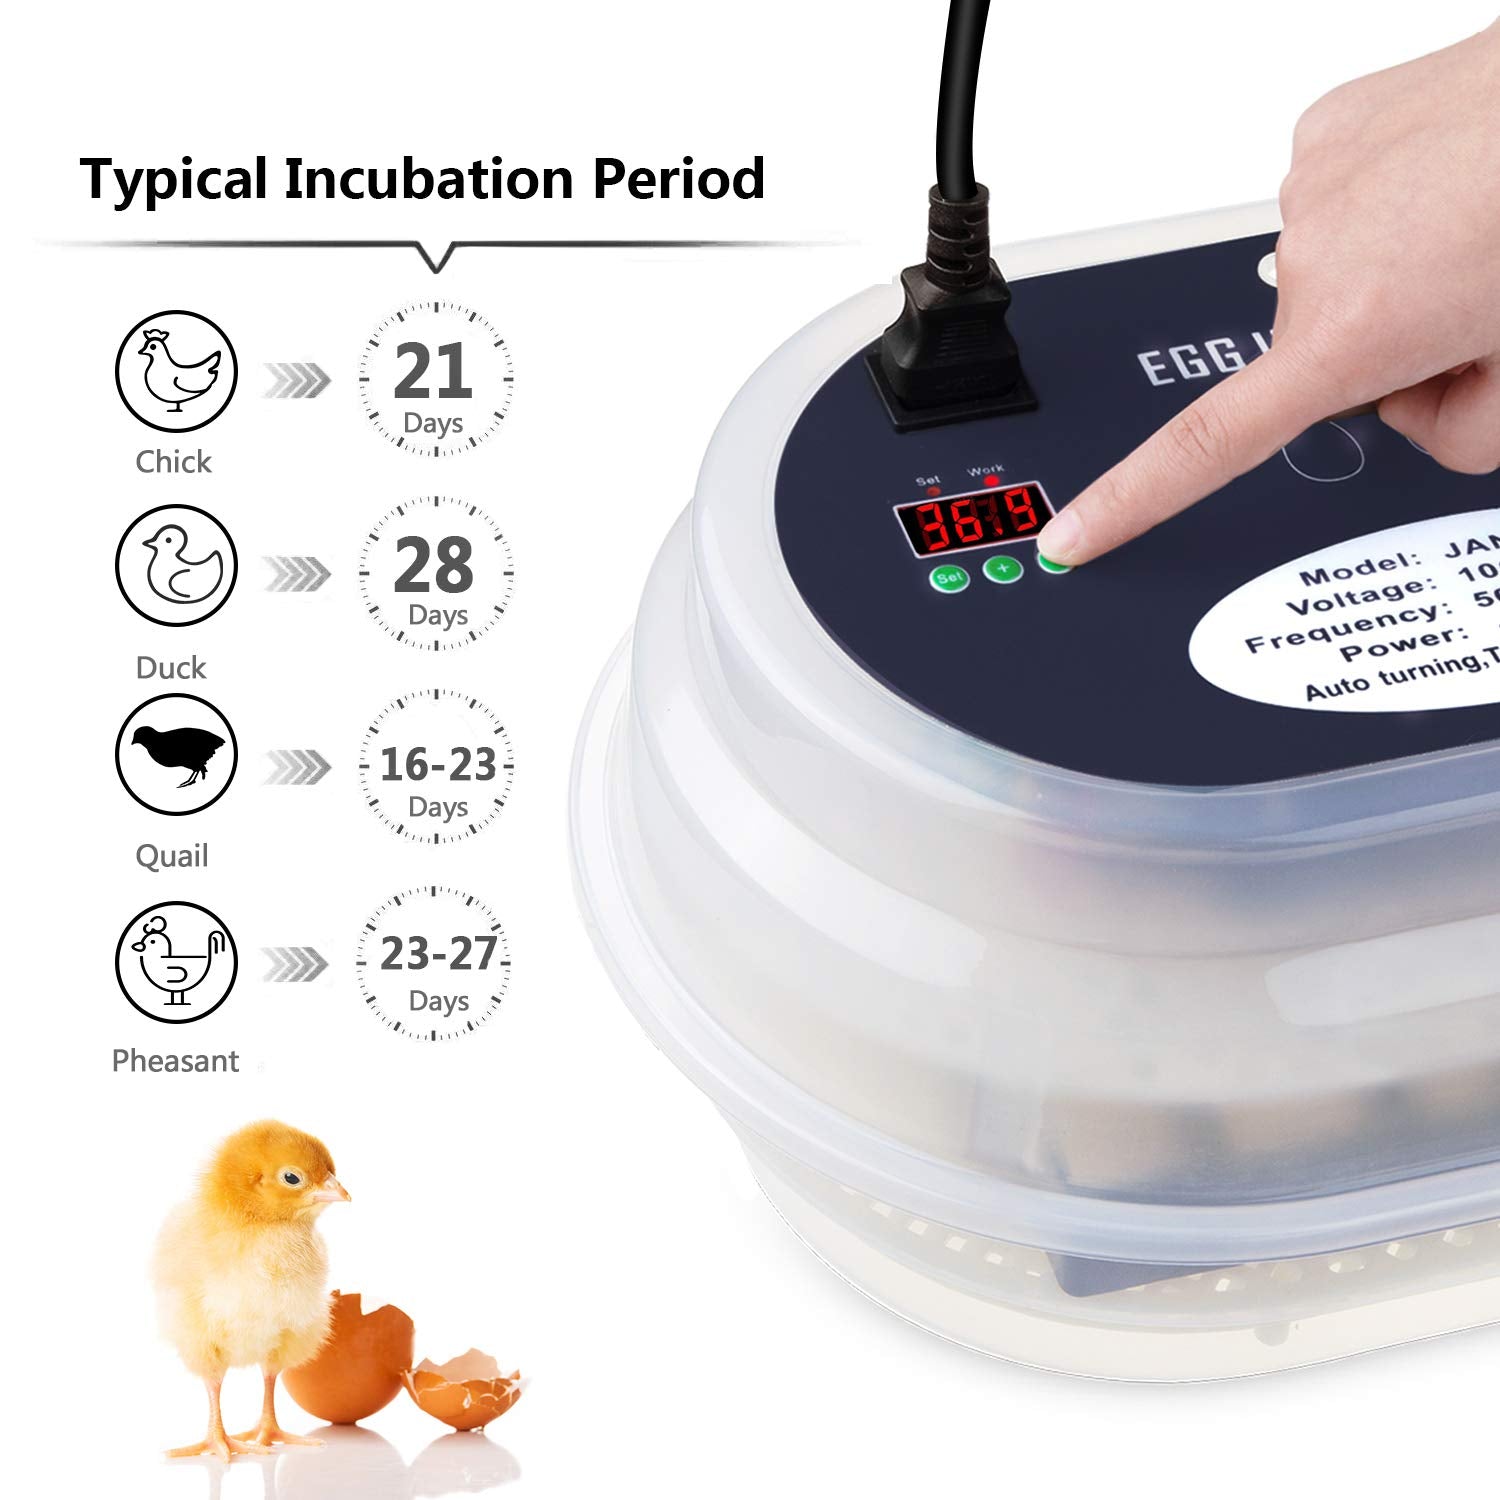 Egg Incubator, HBlife 9-12 Digital Fully Automatic Incubator for Chicken Eggs, Poultry Hatcher for Chickens Ducks Birds